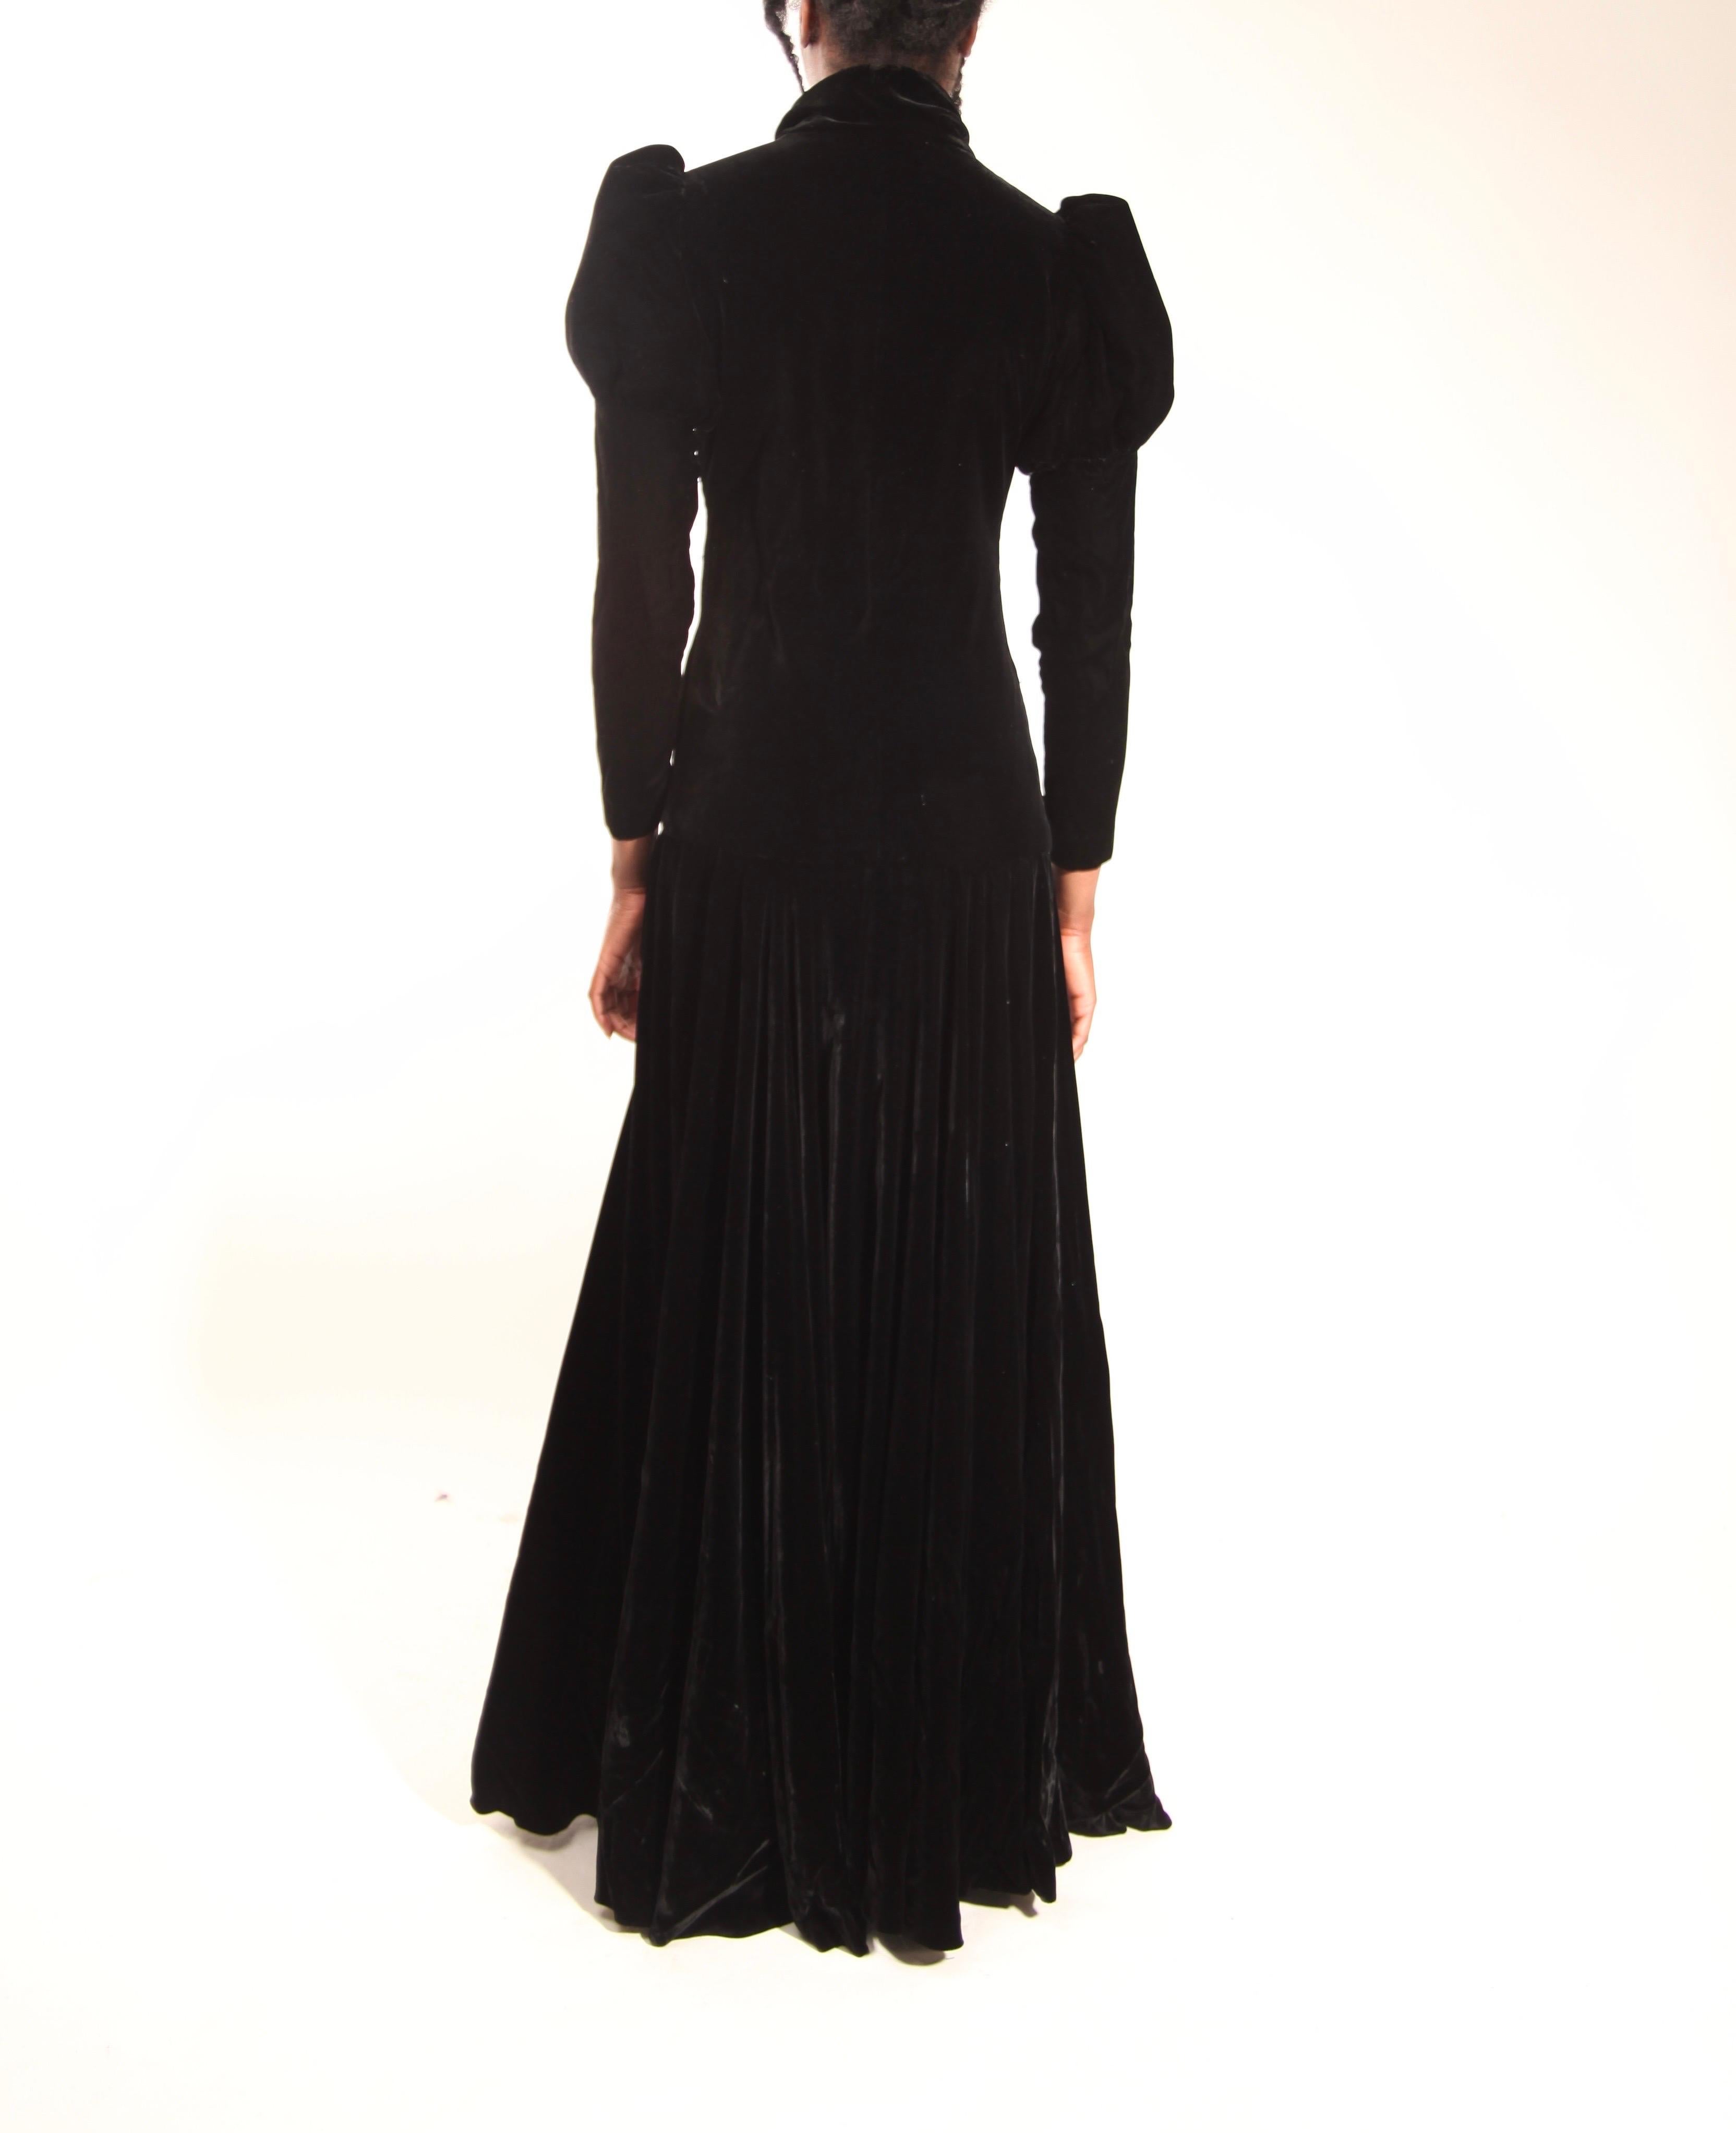 Christian Dior Paris numbered couture black silk evening gown. C. 1960s 3